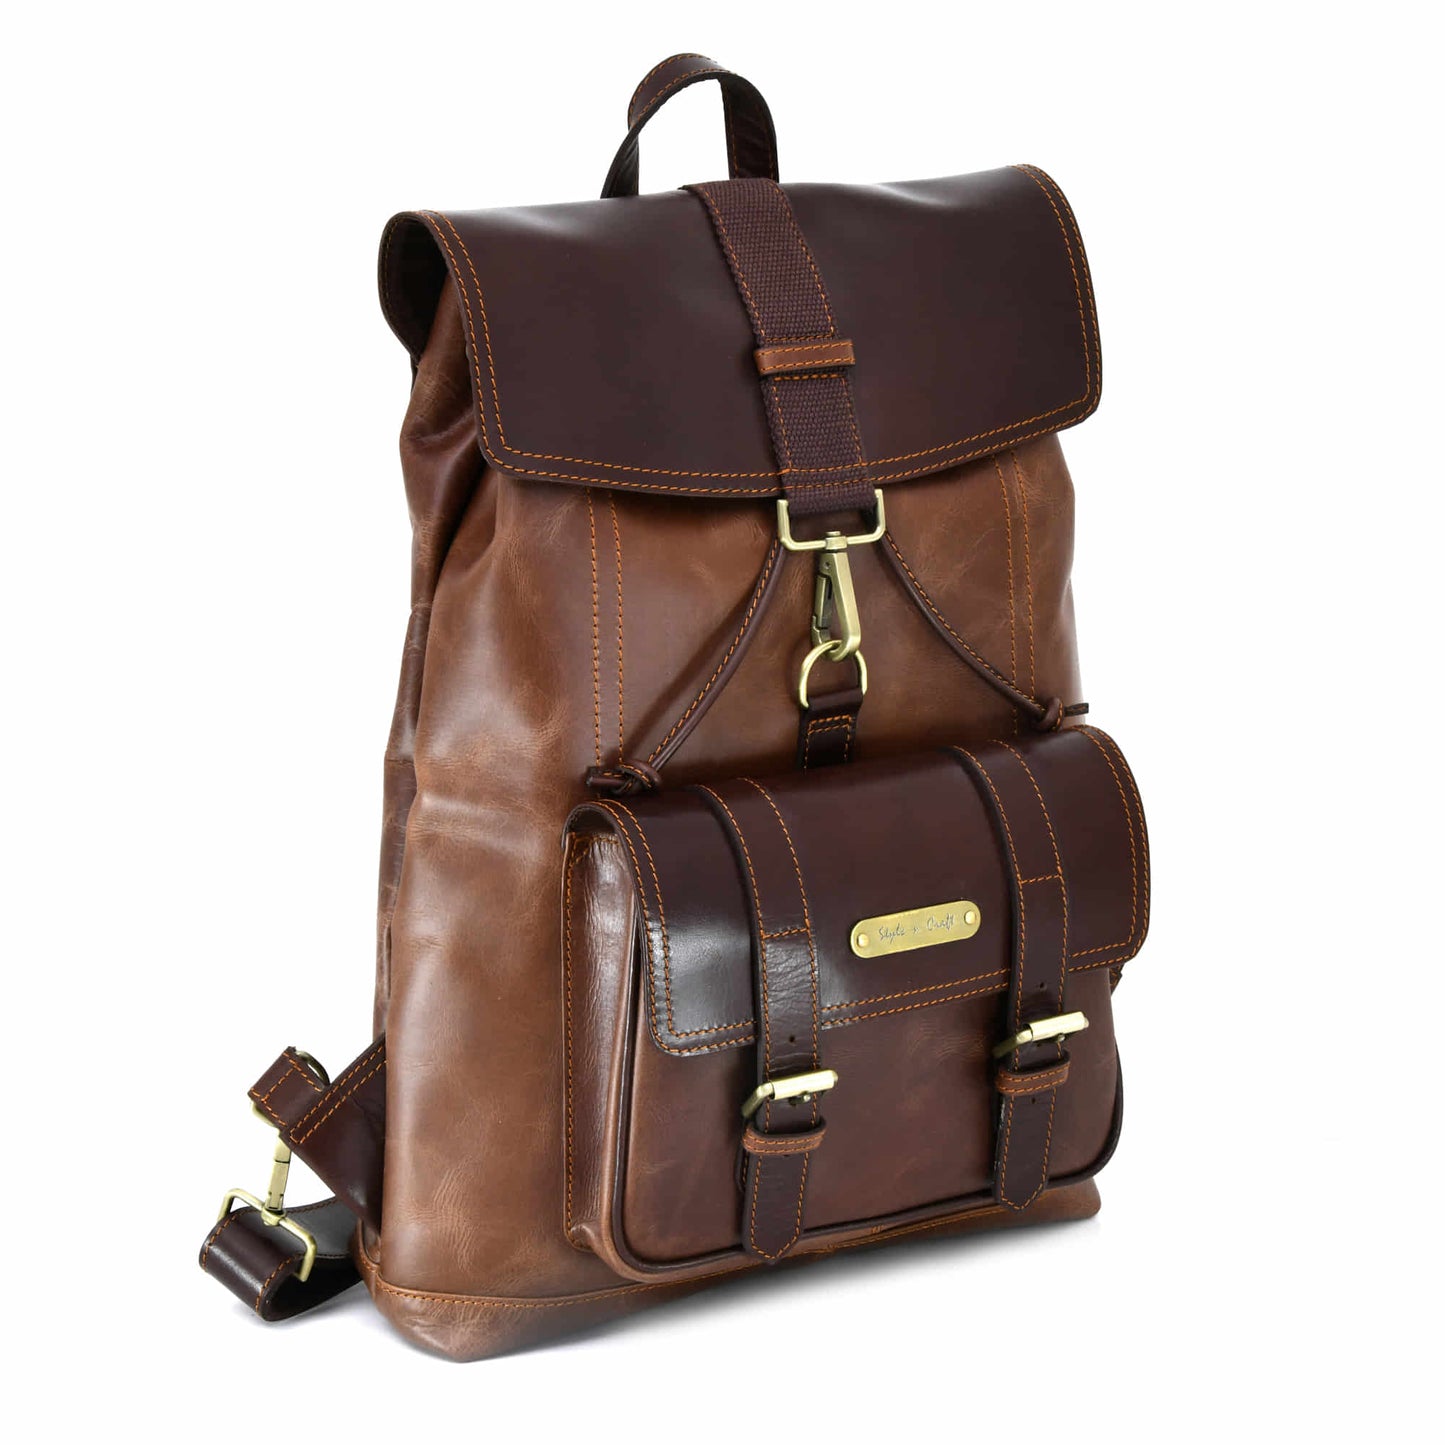 Style n Craft 392152 Tall Backpack in Light & Dark Brown Combination Full Grain Leather - Front angled view showing the main bag & front pocket in light brown crunch effect & the top handle, top flap and the front pocket flap of the bag in dark brown